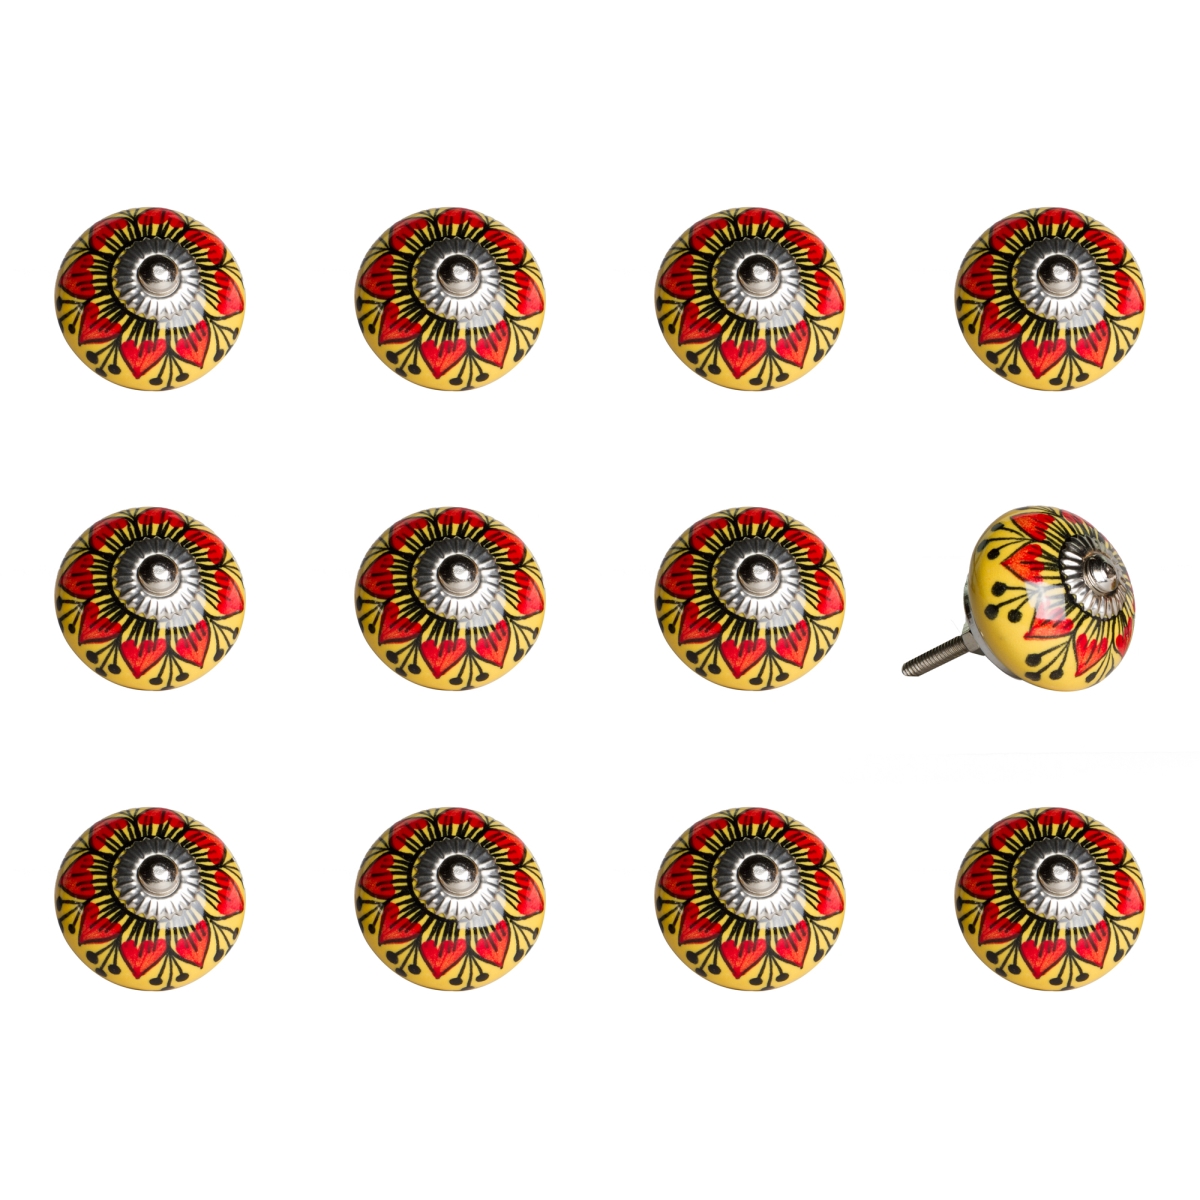 676685045188 Vintage Ceramic Hand Painted Knob Set - Red & Yellow - Pack Of 12